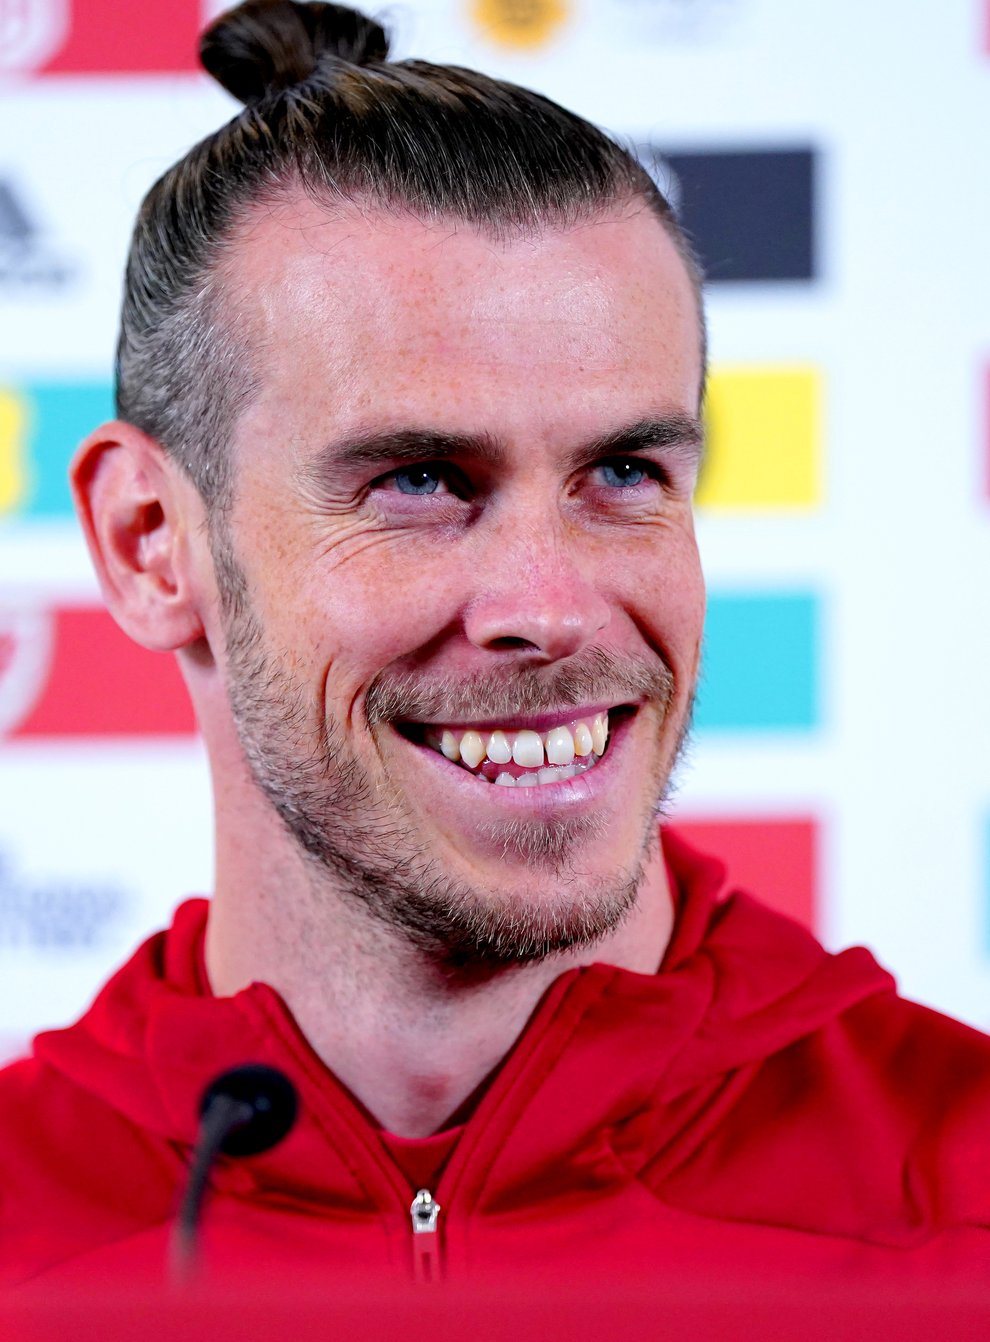 Gareth Bale has been linked with a move to hometown club Cardiff this summer (Nick Potts/PA)